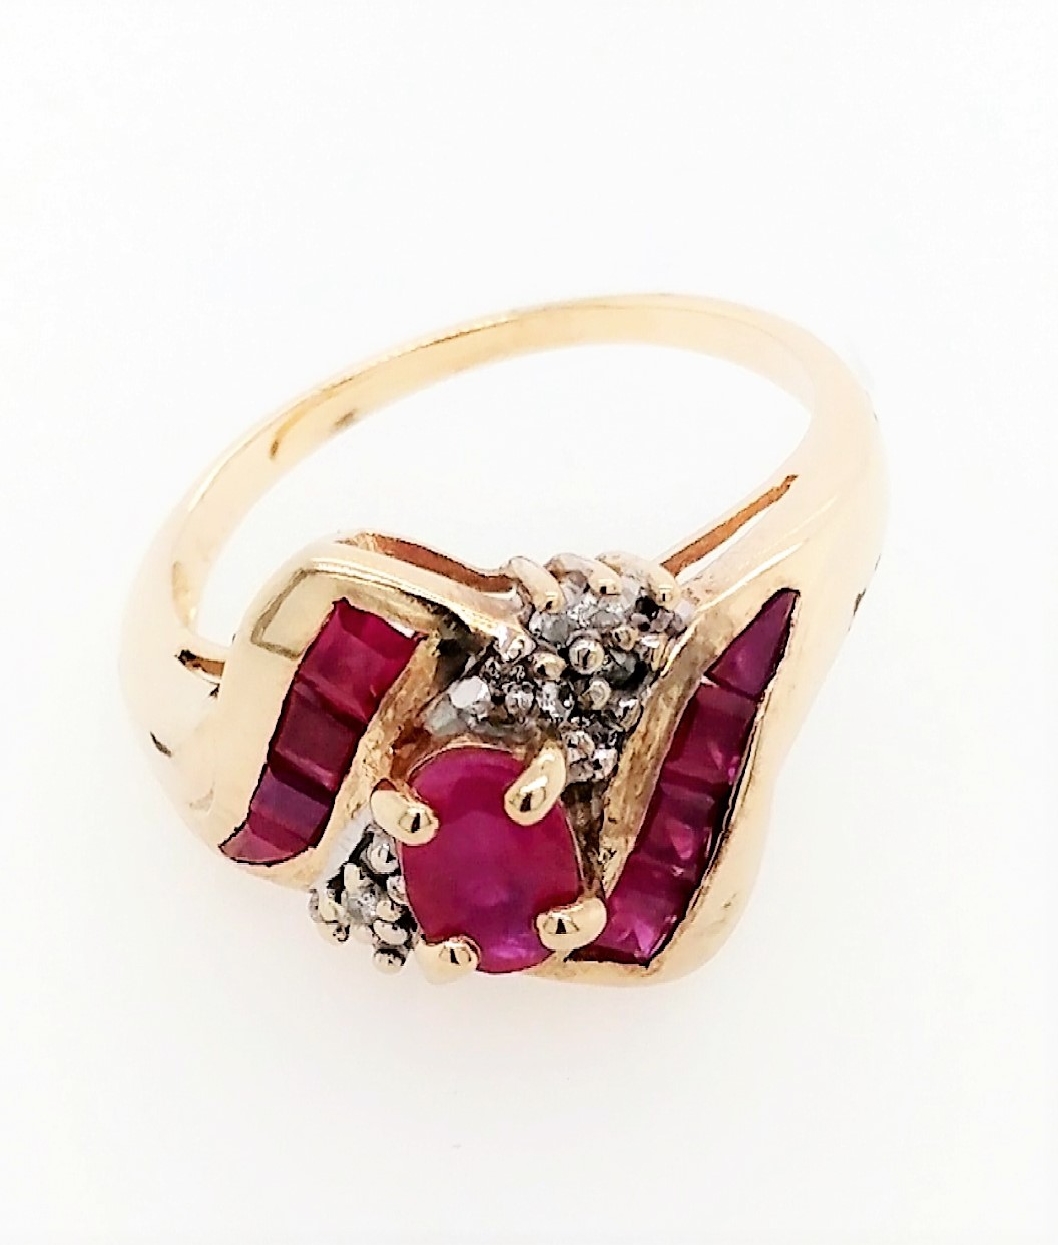 14k Yellow Gold ruby Oval with 8 Princess Cut Rubies w Accent Diamonds Size 7.25